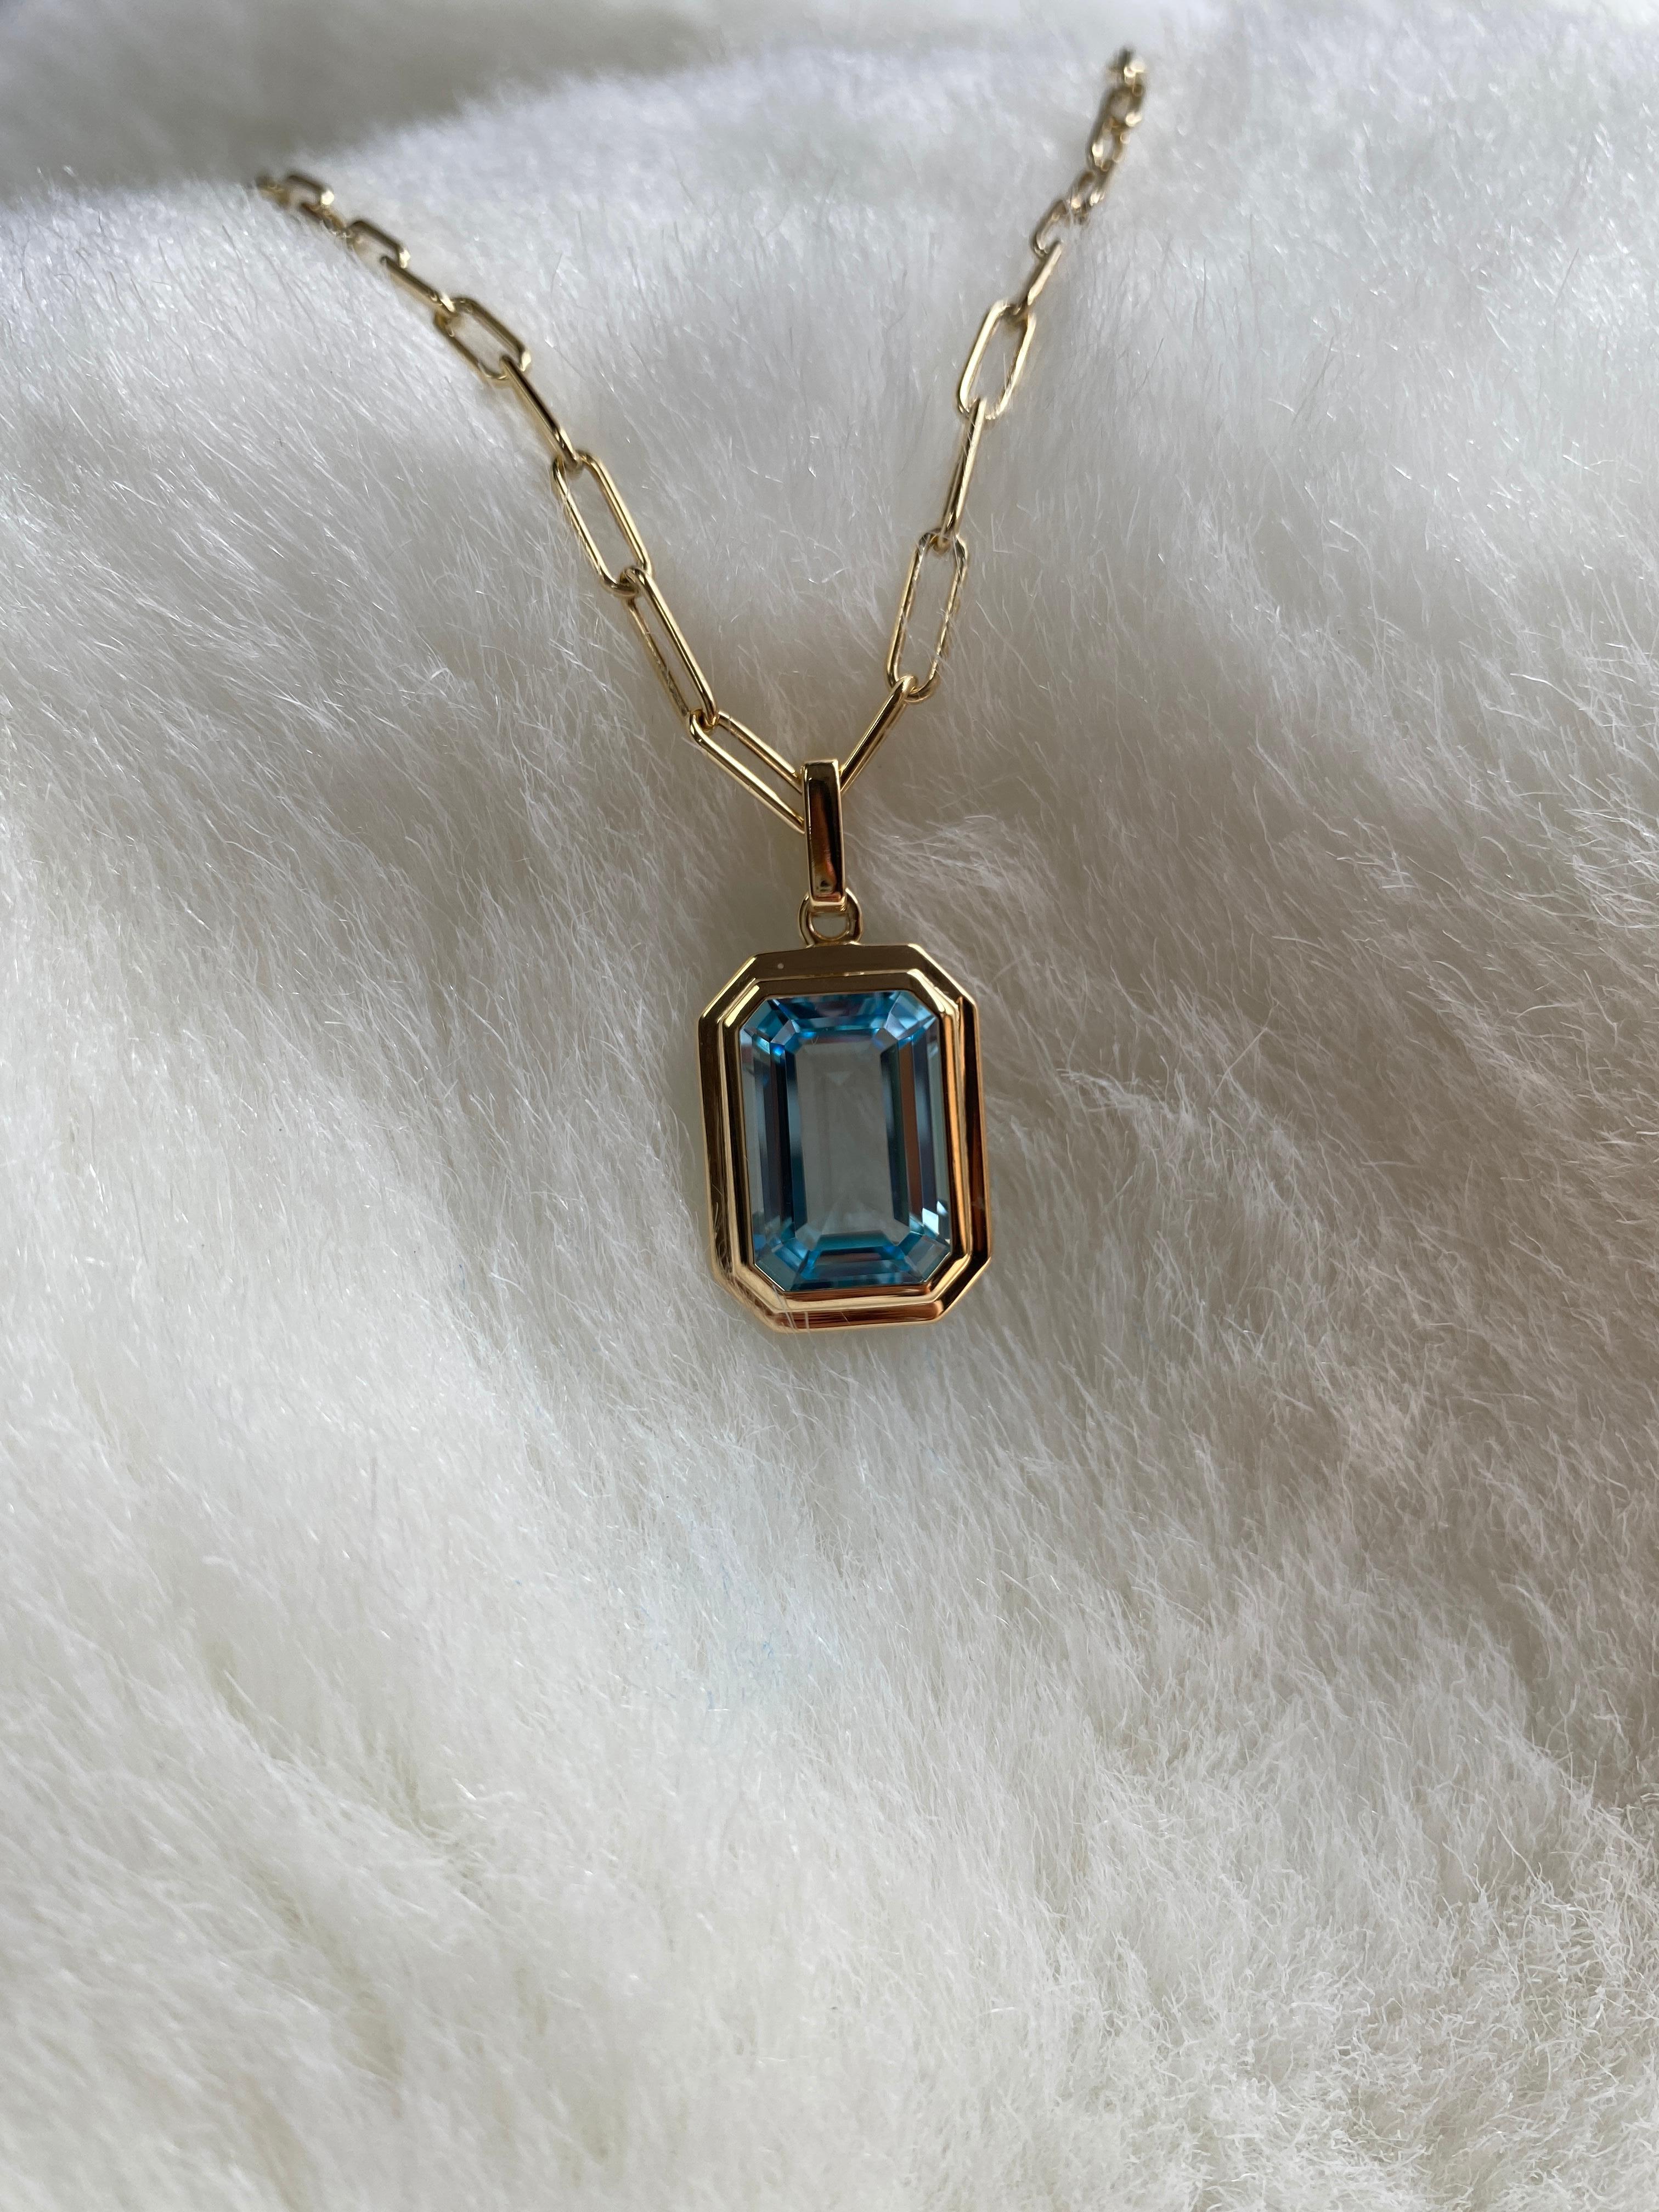 This beautiful Blue Topaz Emerald Cut Bezel Set Pendant in 18K Yellow Gold is from our ‘Manhattan’ Collection. Minimalist lines yet bold structures are what our Manhattan Collection is all about. Our pieces represent the famous skyline and